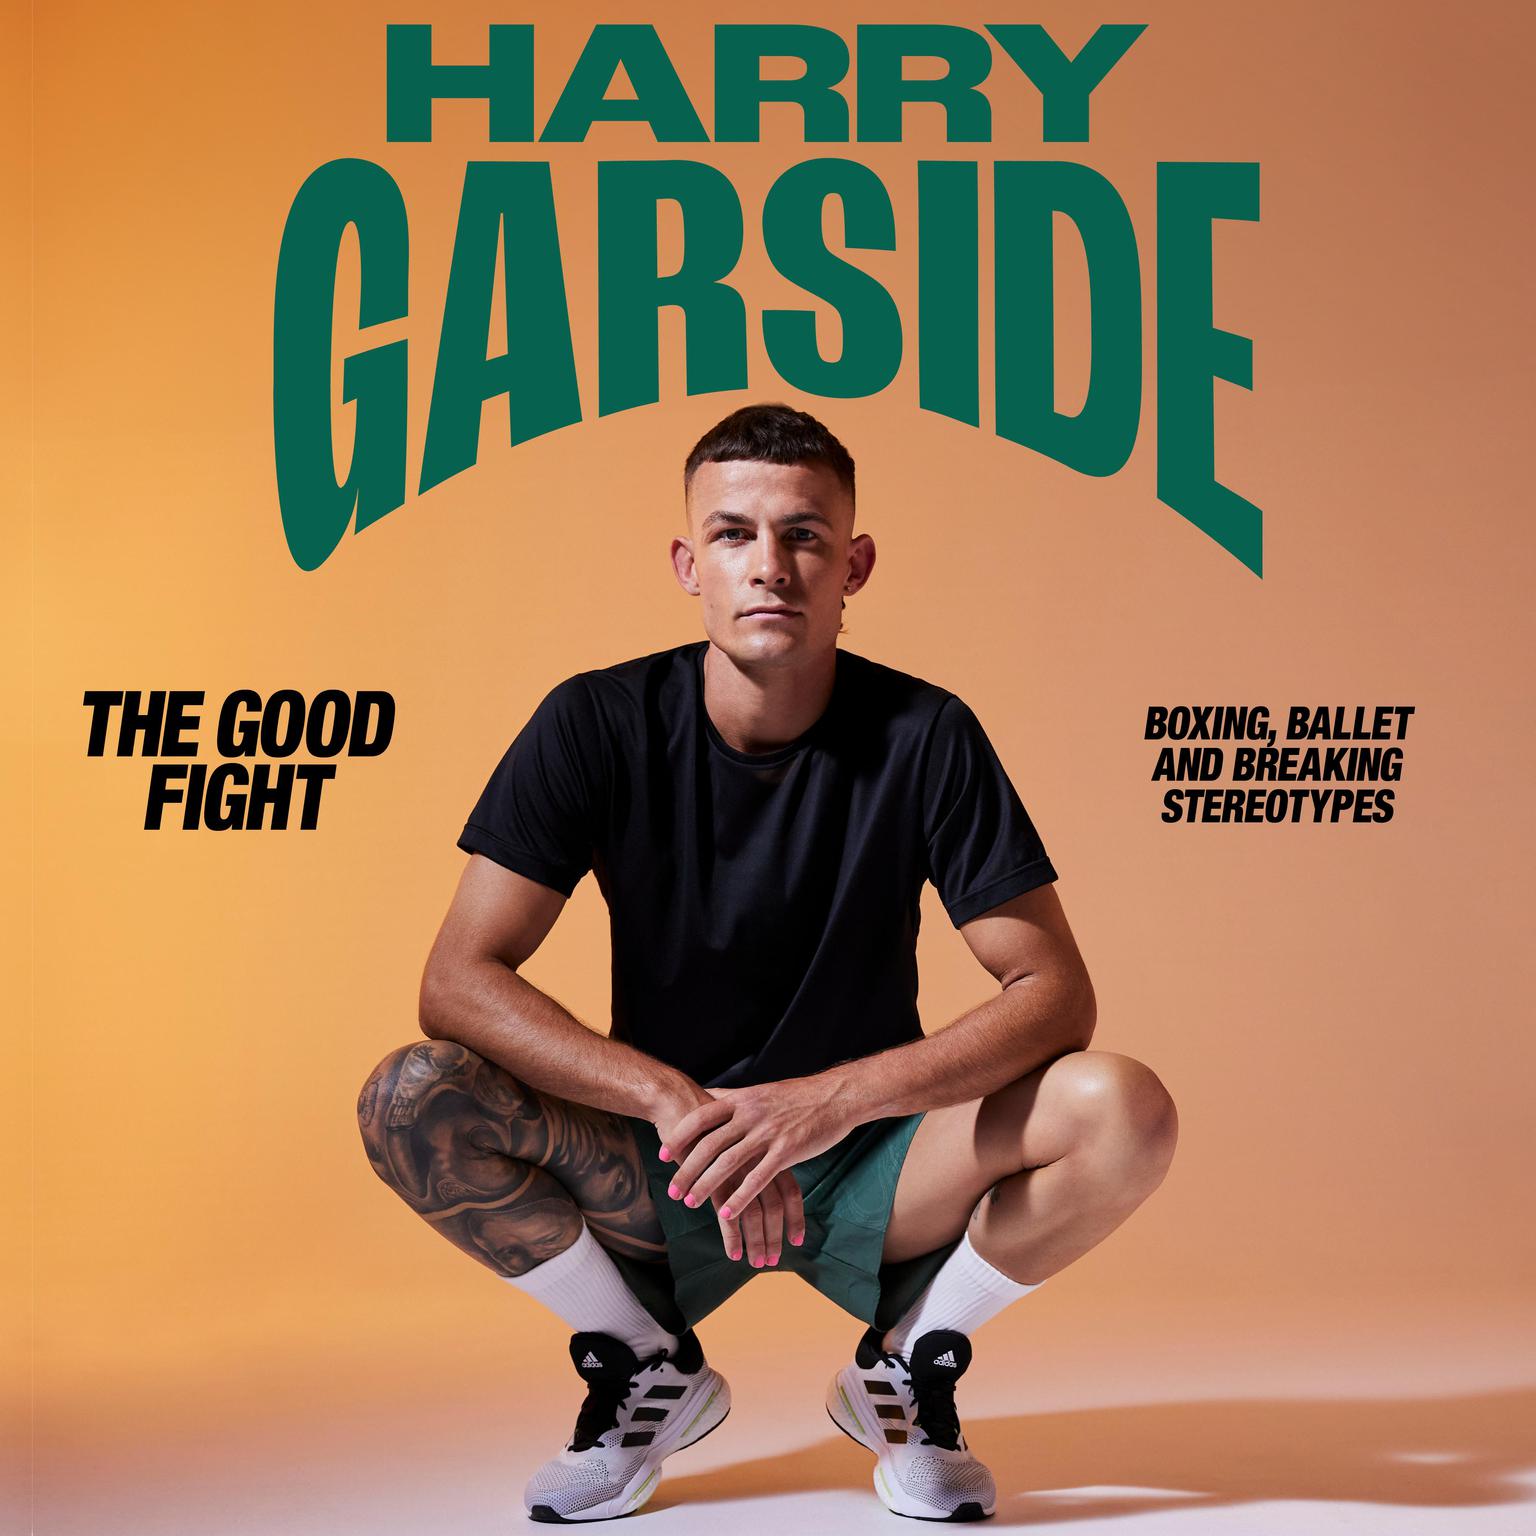 The Good Fight: Boxing, ballet and breaking stereotypes Audiobook, by Harry Garside